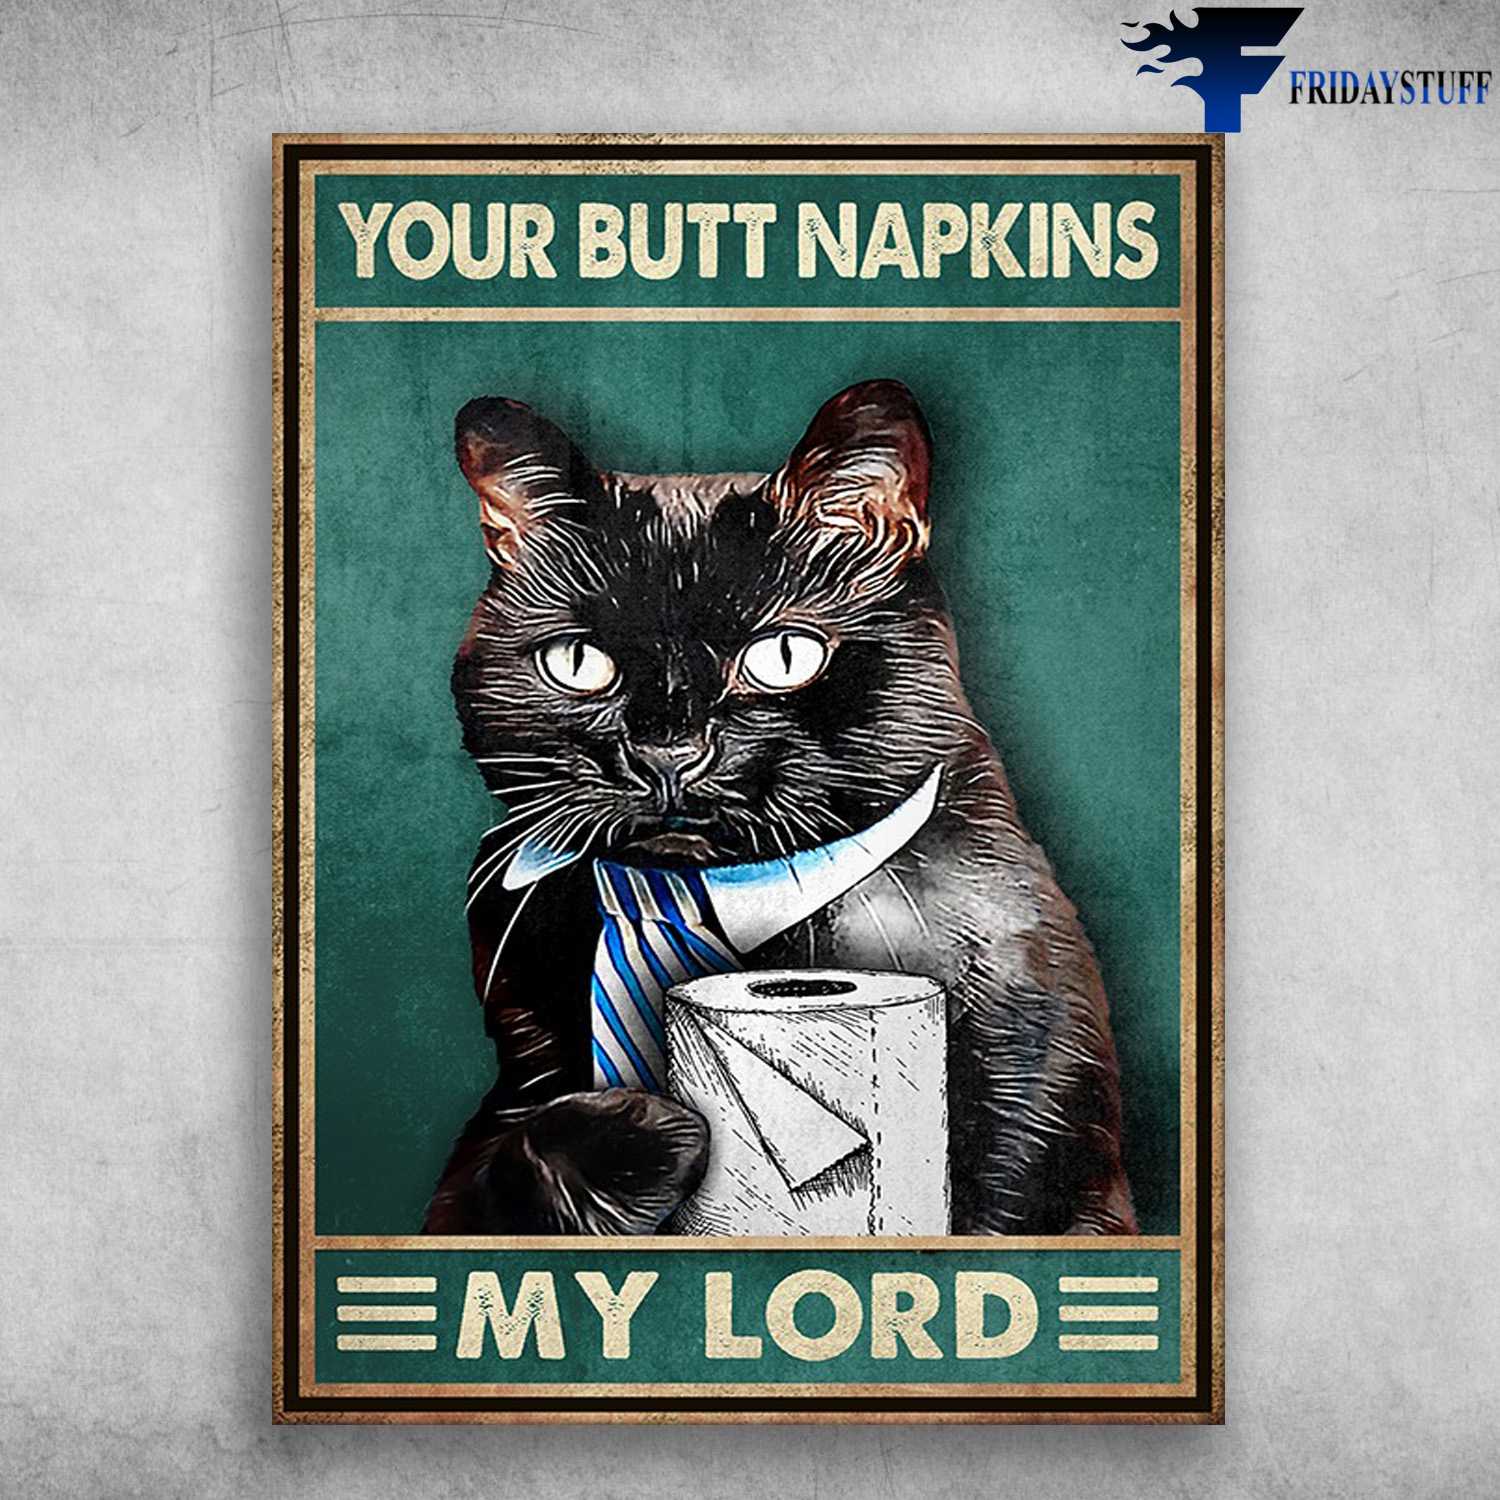 Black Cat, Tolet Poster - Your Butt Napkins, My Lord